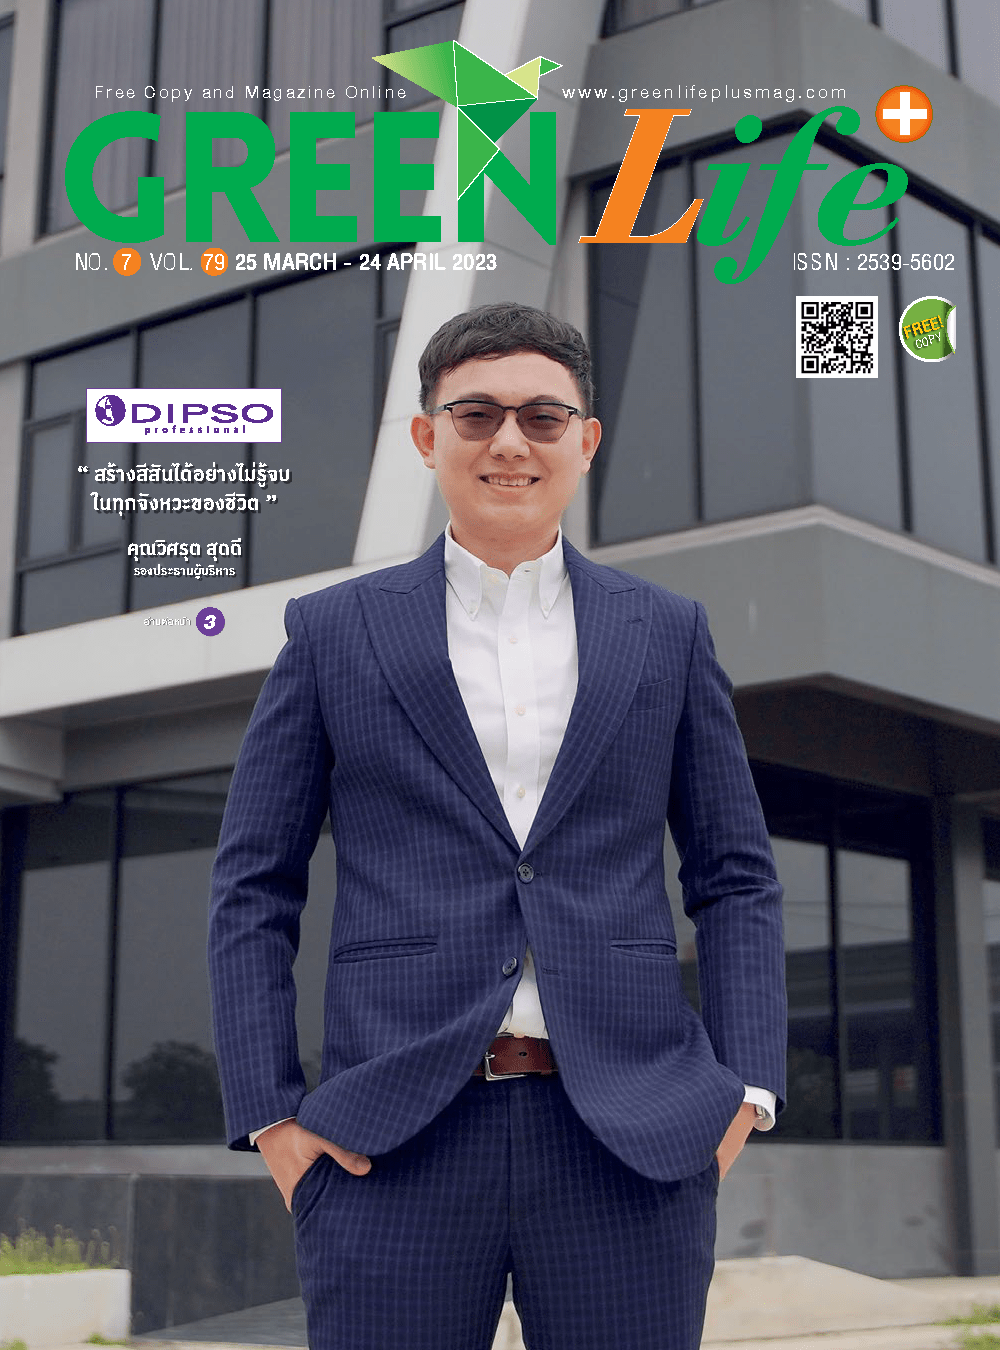 Green Life Plus Issue 79: March 2023 E-Book